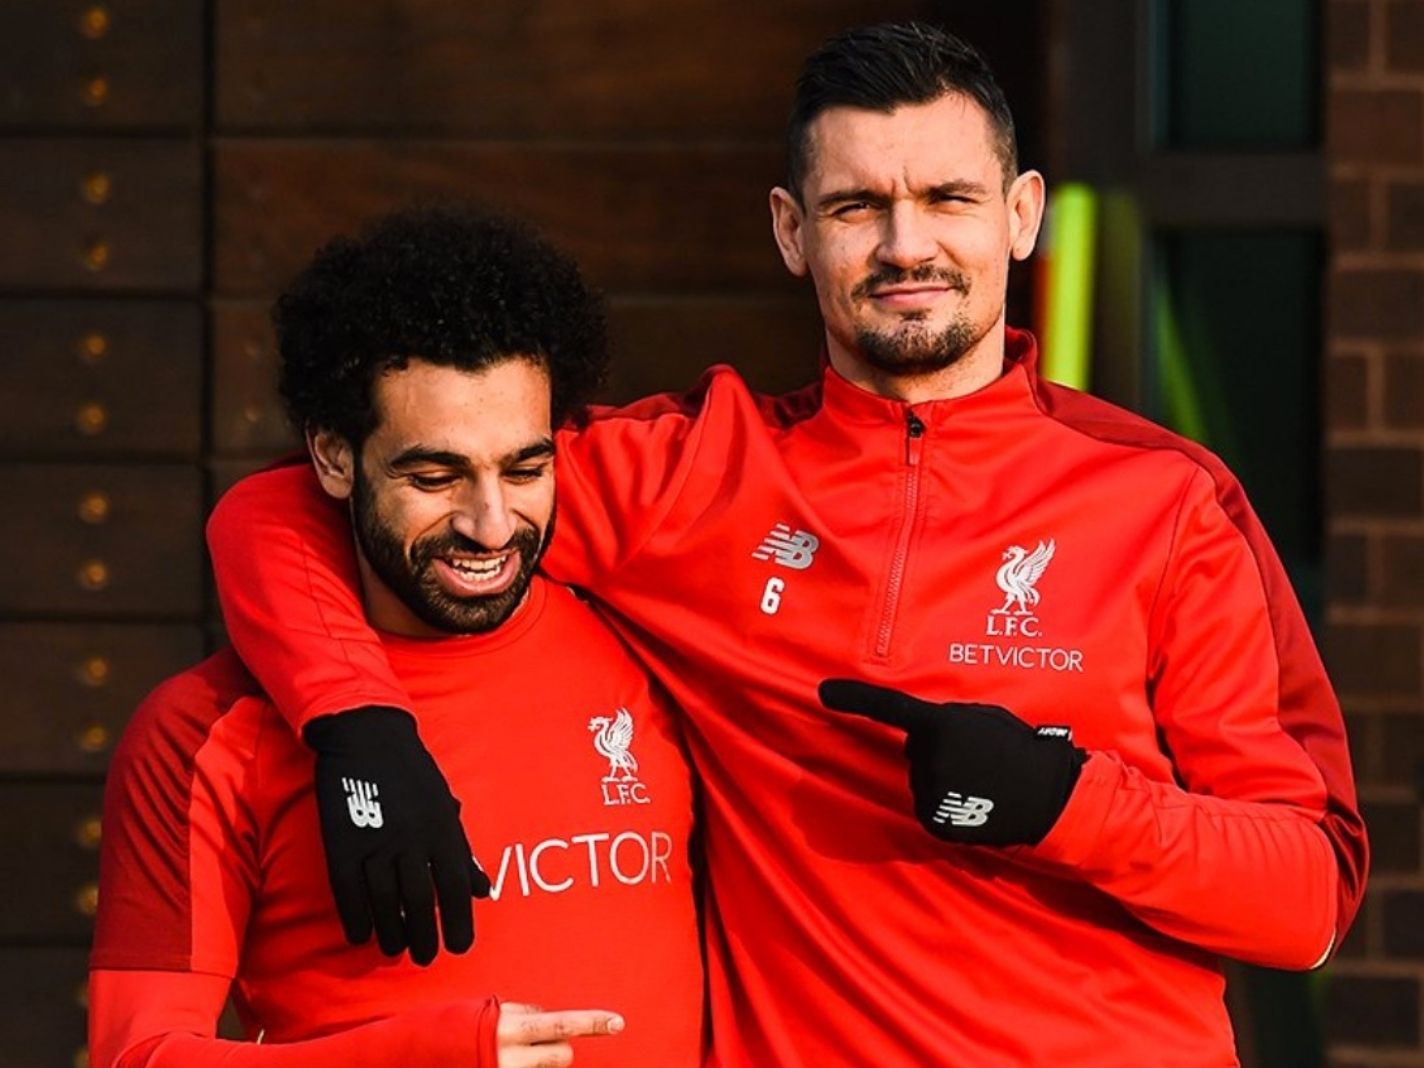 Dejan Lovren gives priceless reply when asked to choose between his wife or Mo Salah